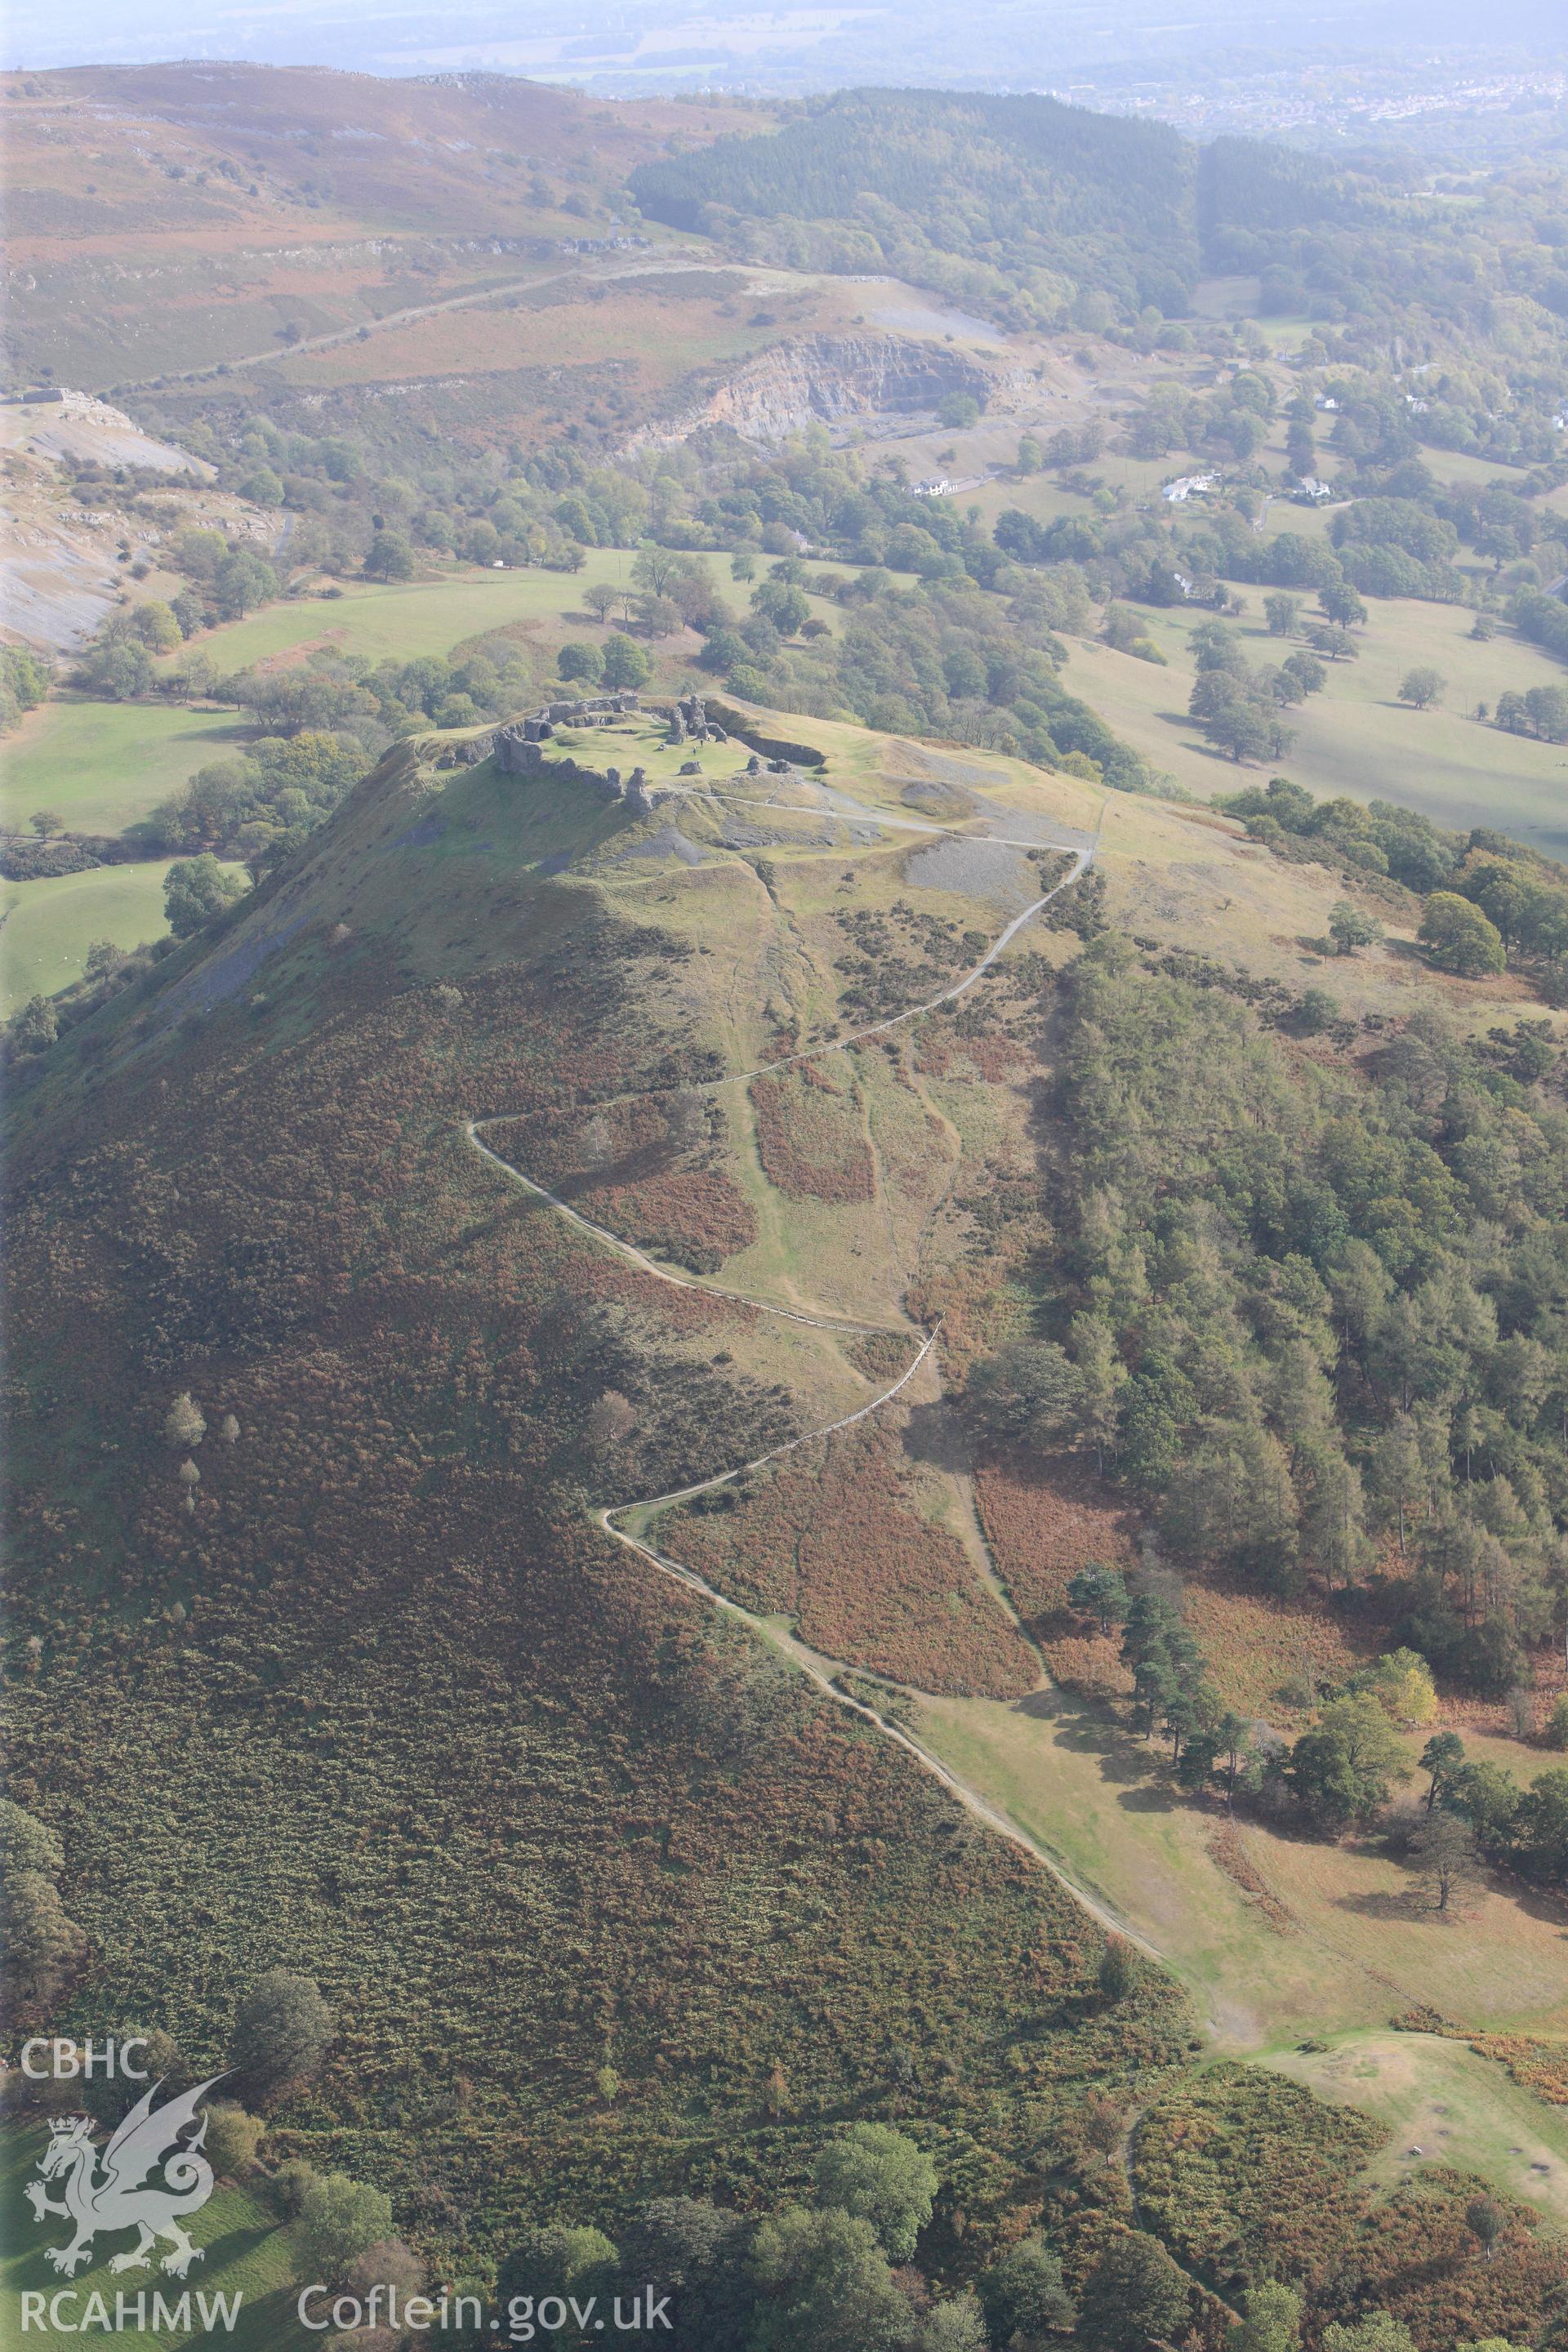 RCAHMW colour oblique photograph of Castell Dinas Bran. Taken by Toby Driver on 04/10/2011.